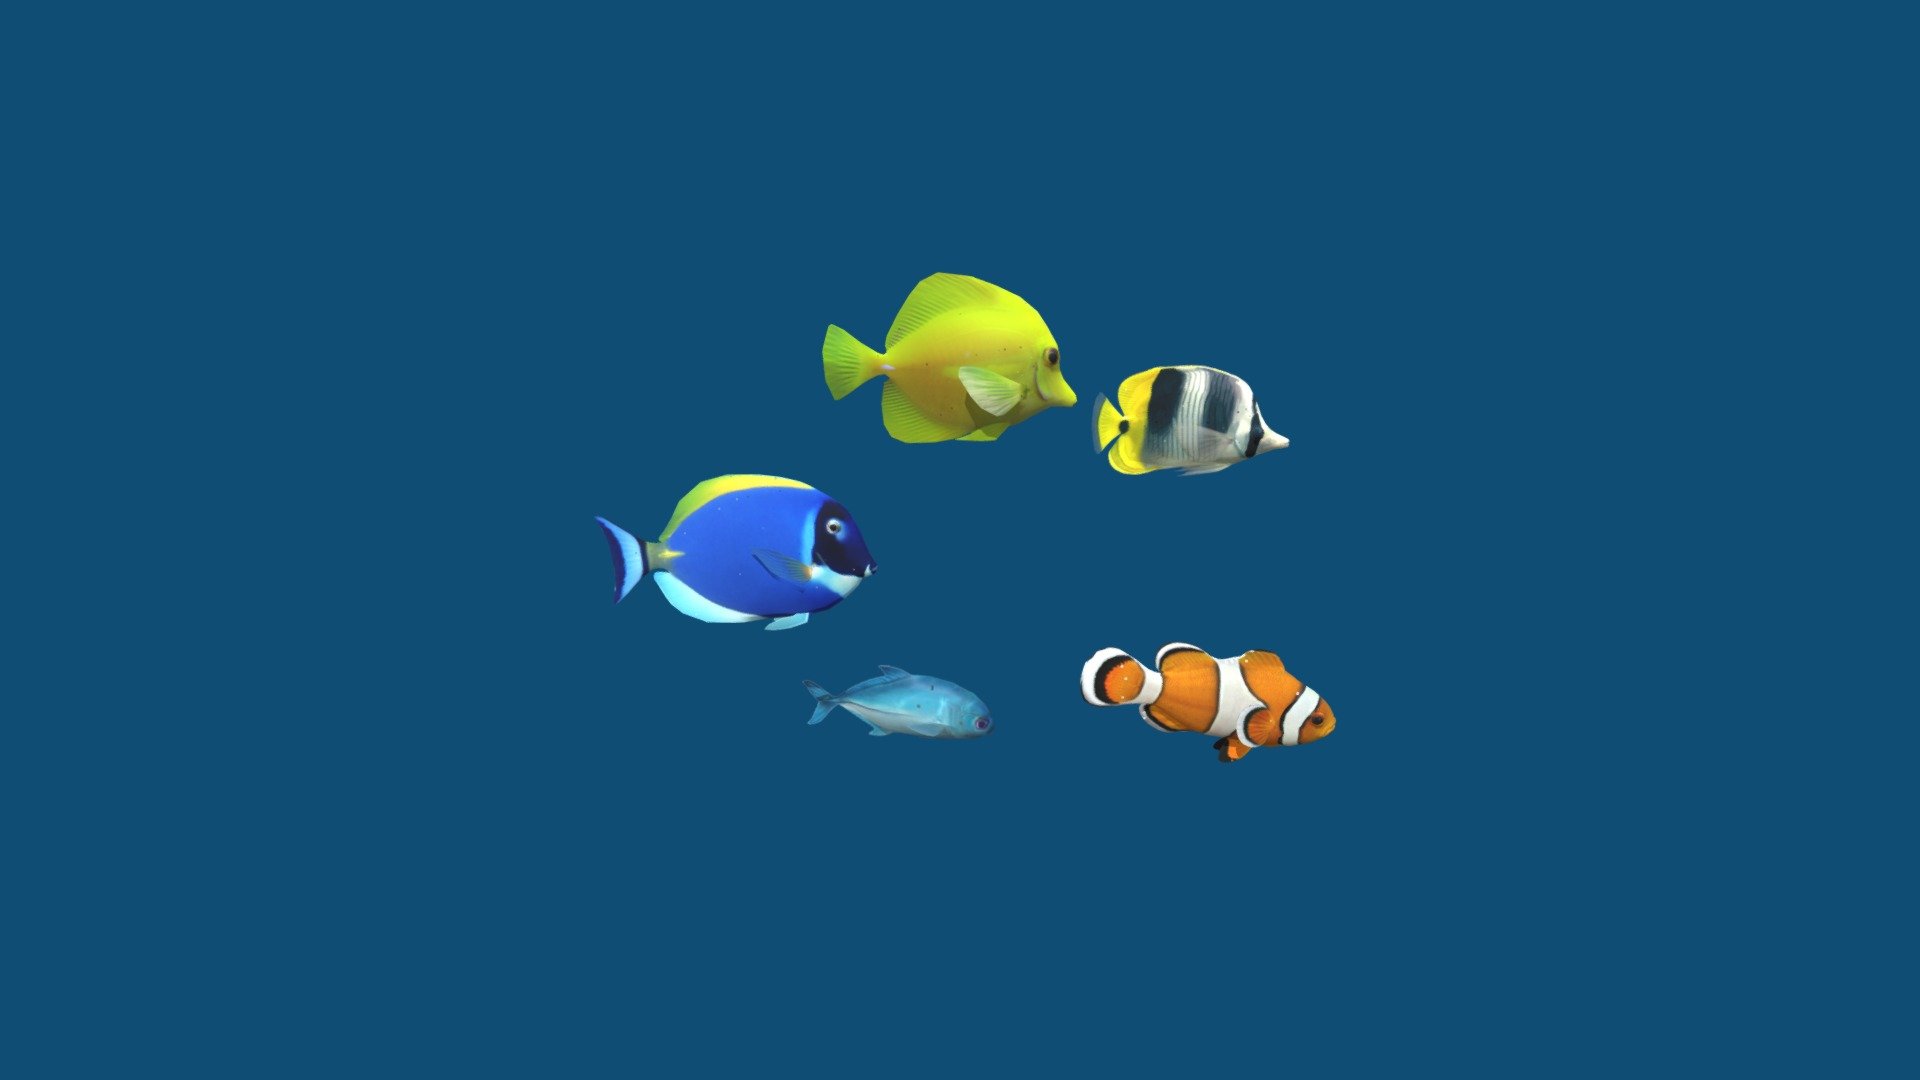 ! There is my 2nd version of this pack with 6 fish https://skfb.ly/osZQJ 



Coral Fish Pack

include 5 animations:

1 Clownfish.................... (idle 0-193)

2 Double-Saddle fish.... (idle 0-250)

3 Blue Tang ....................(idle 0-270)

4 Yellow Tang .................(idle 0-248)

5 Caranx......................... (idle 0-60) - Coral Fish Pack 5 - 3D model by Mikhail Nesterov (@cgsoul) 3d model